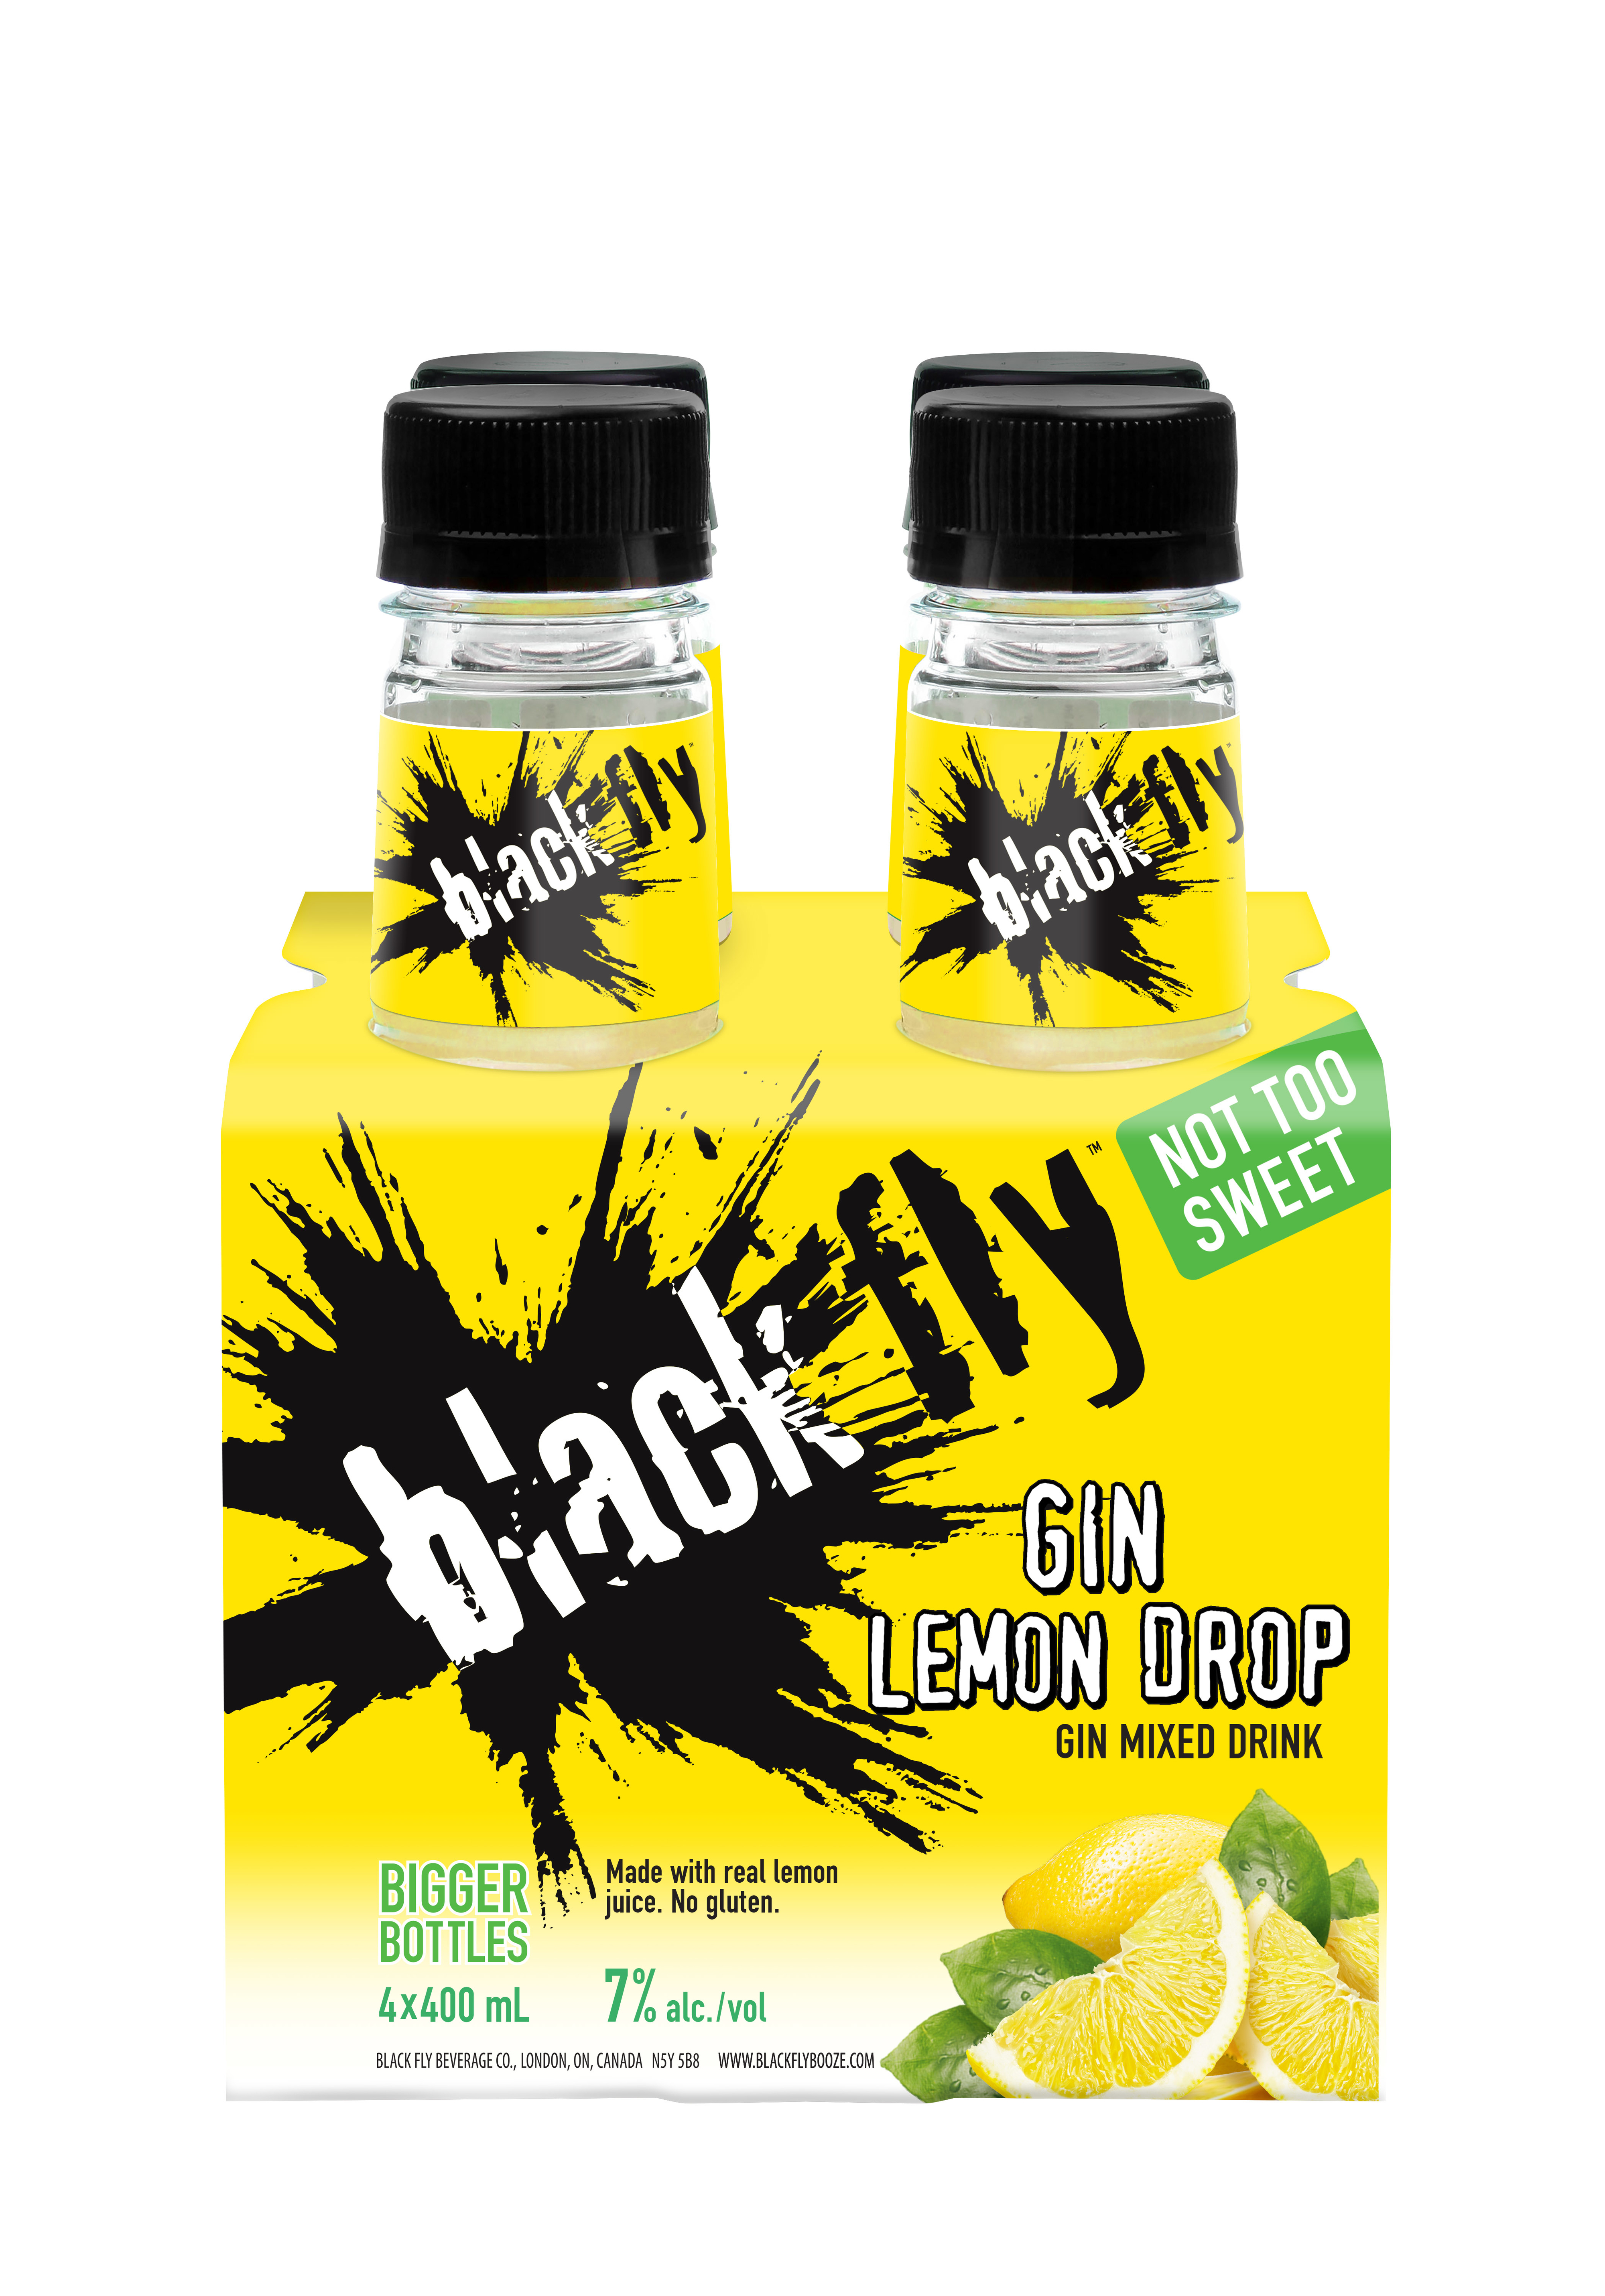 Lemon Drop Gin mixed drink packaging with the brand name &quot;BlackFly&quot; and image of lemon slices, highlighting &#x27;Not Too Sweet&#x27;